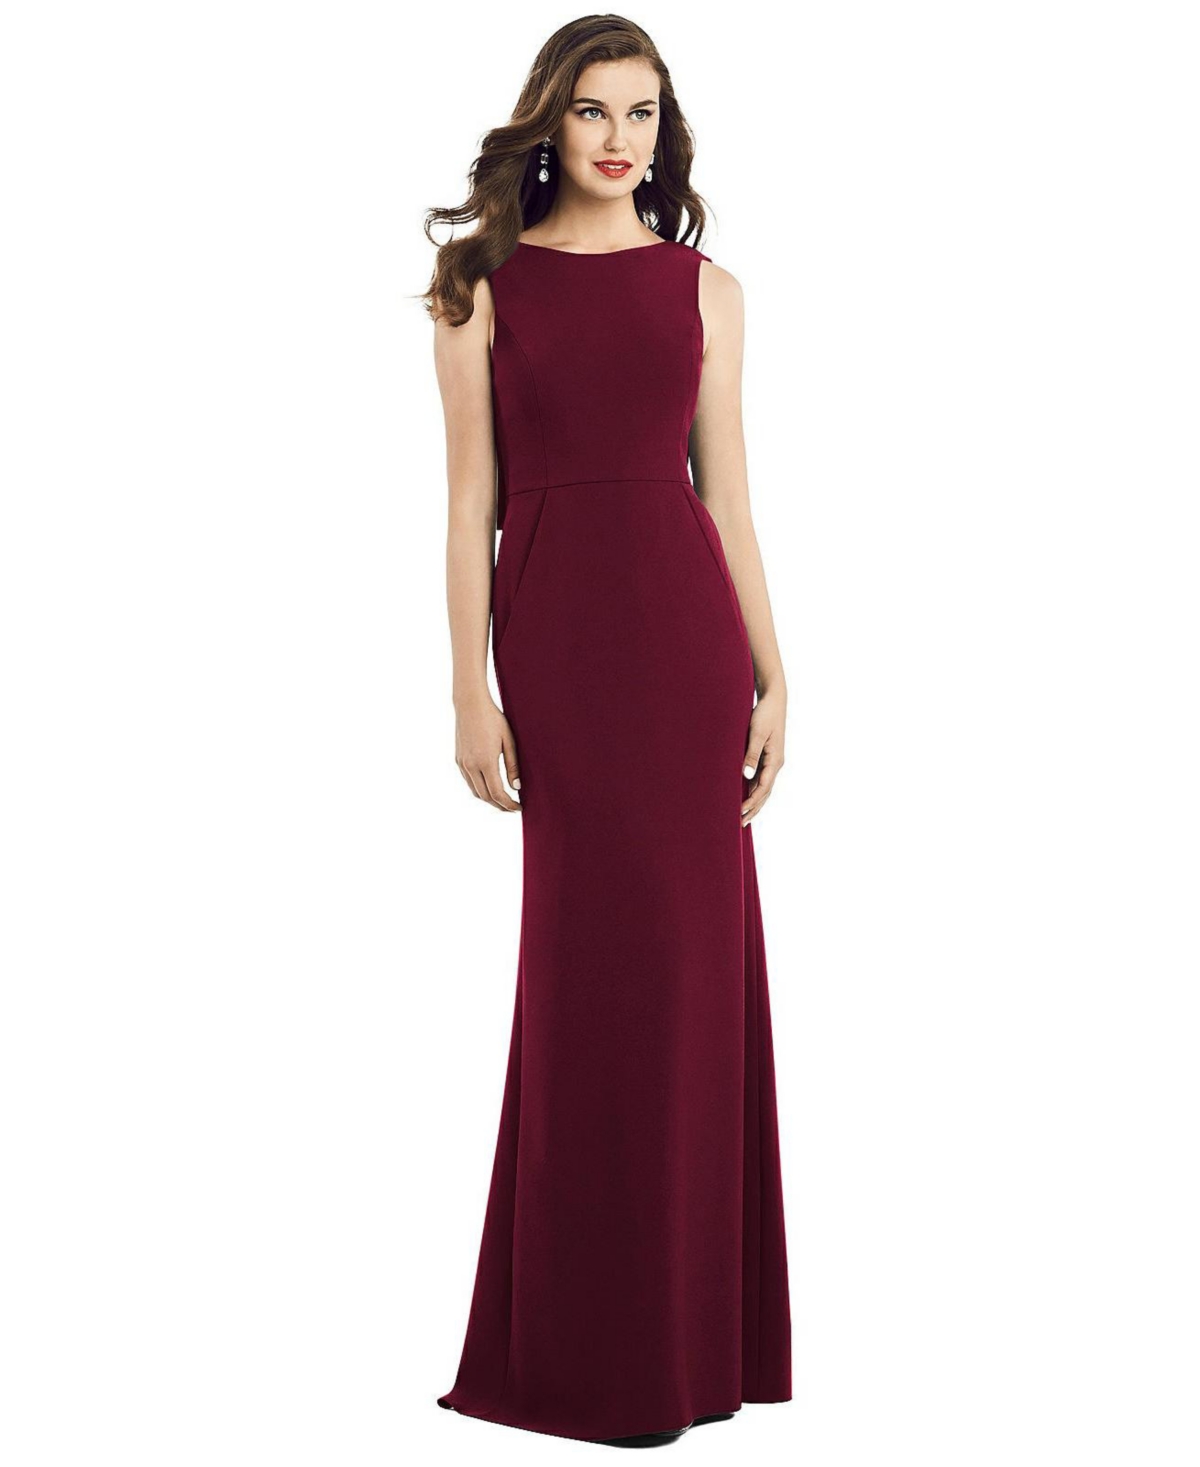 Women's Draped Backless Crepe Dress with Pockets - Cabernet